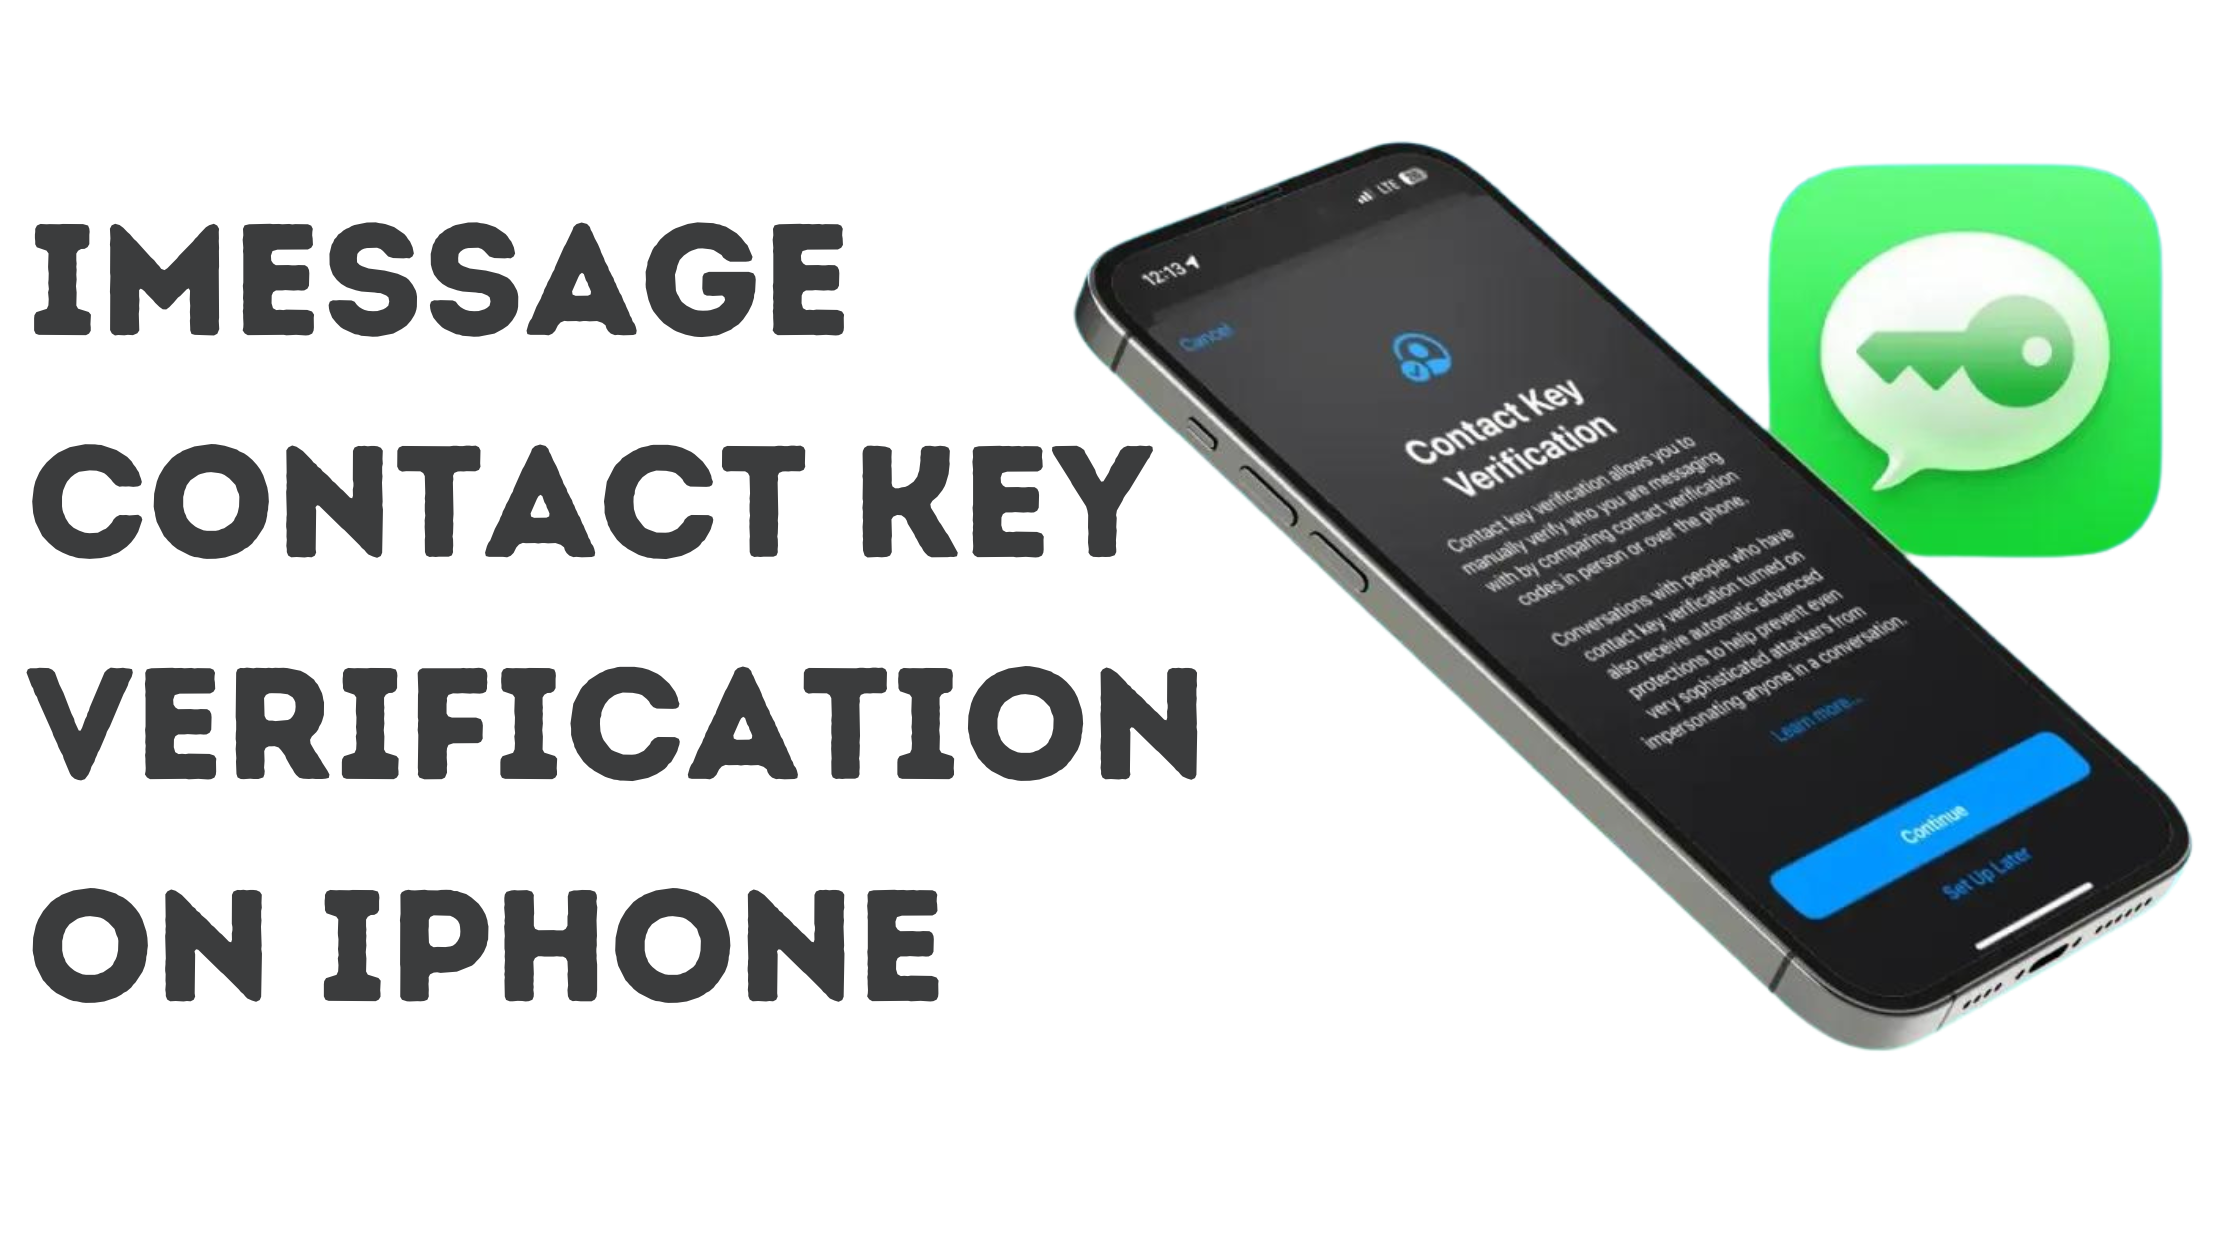 iMessage Contact Key Verification on iPhone